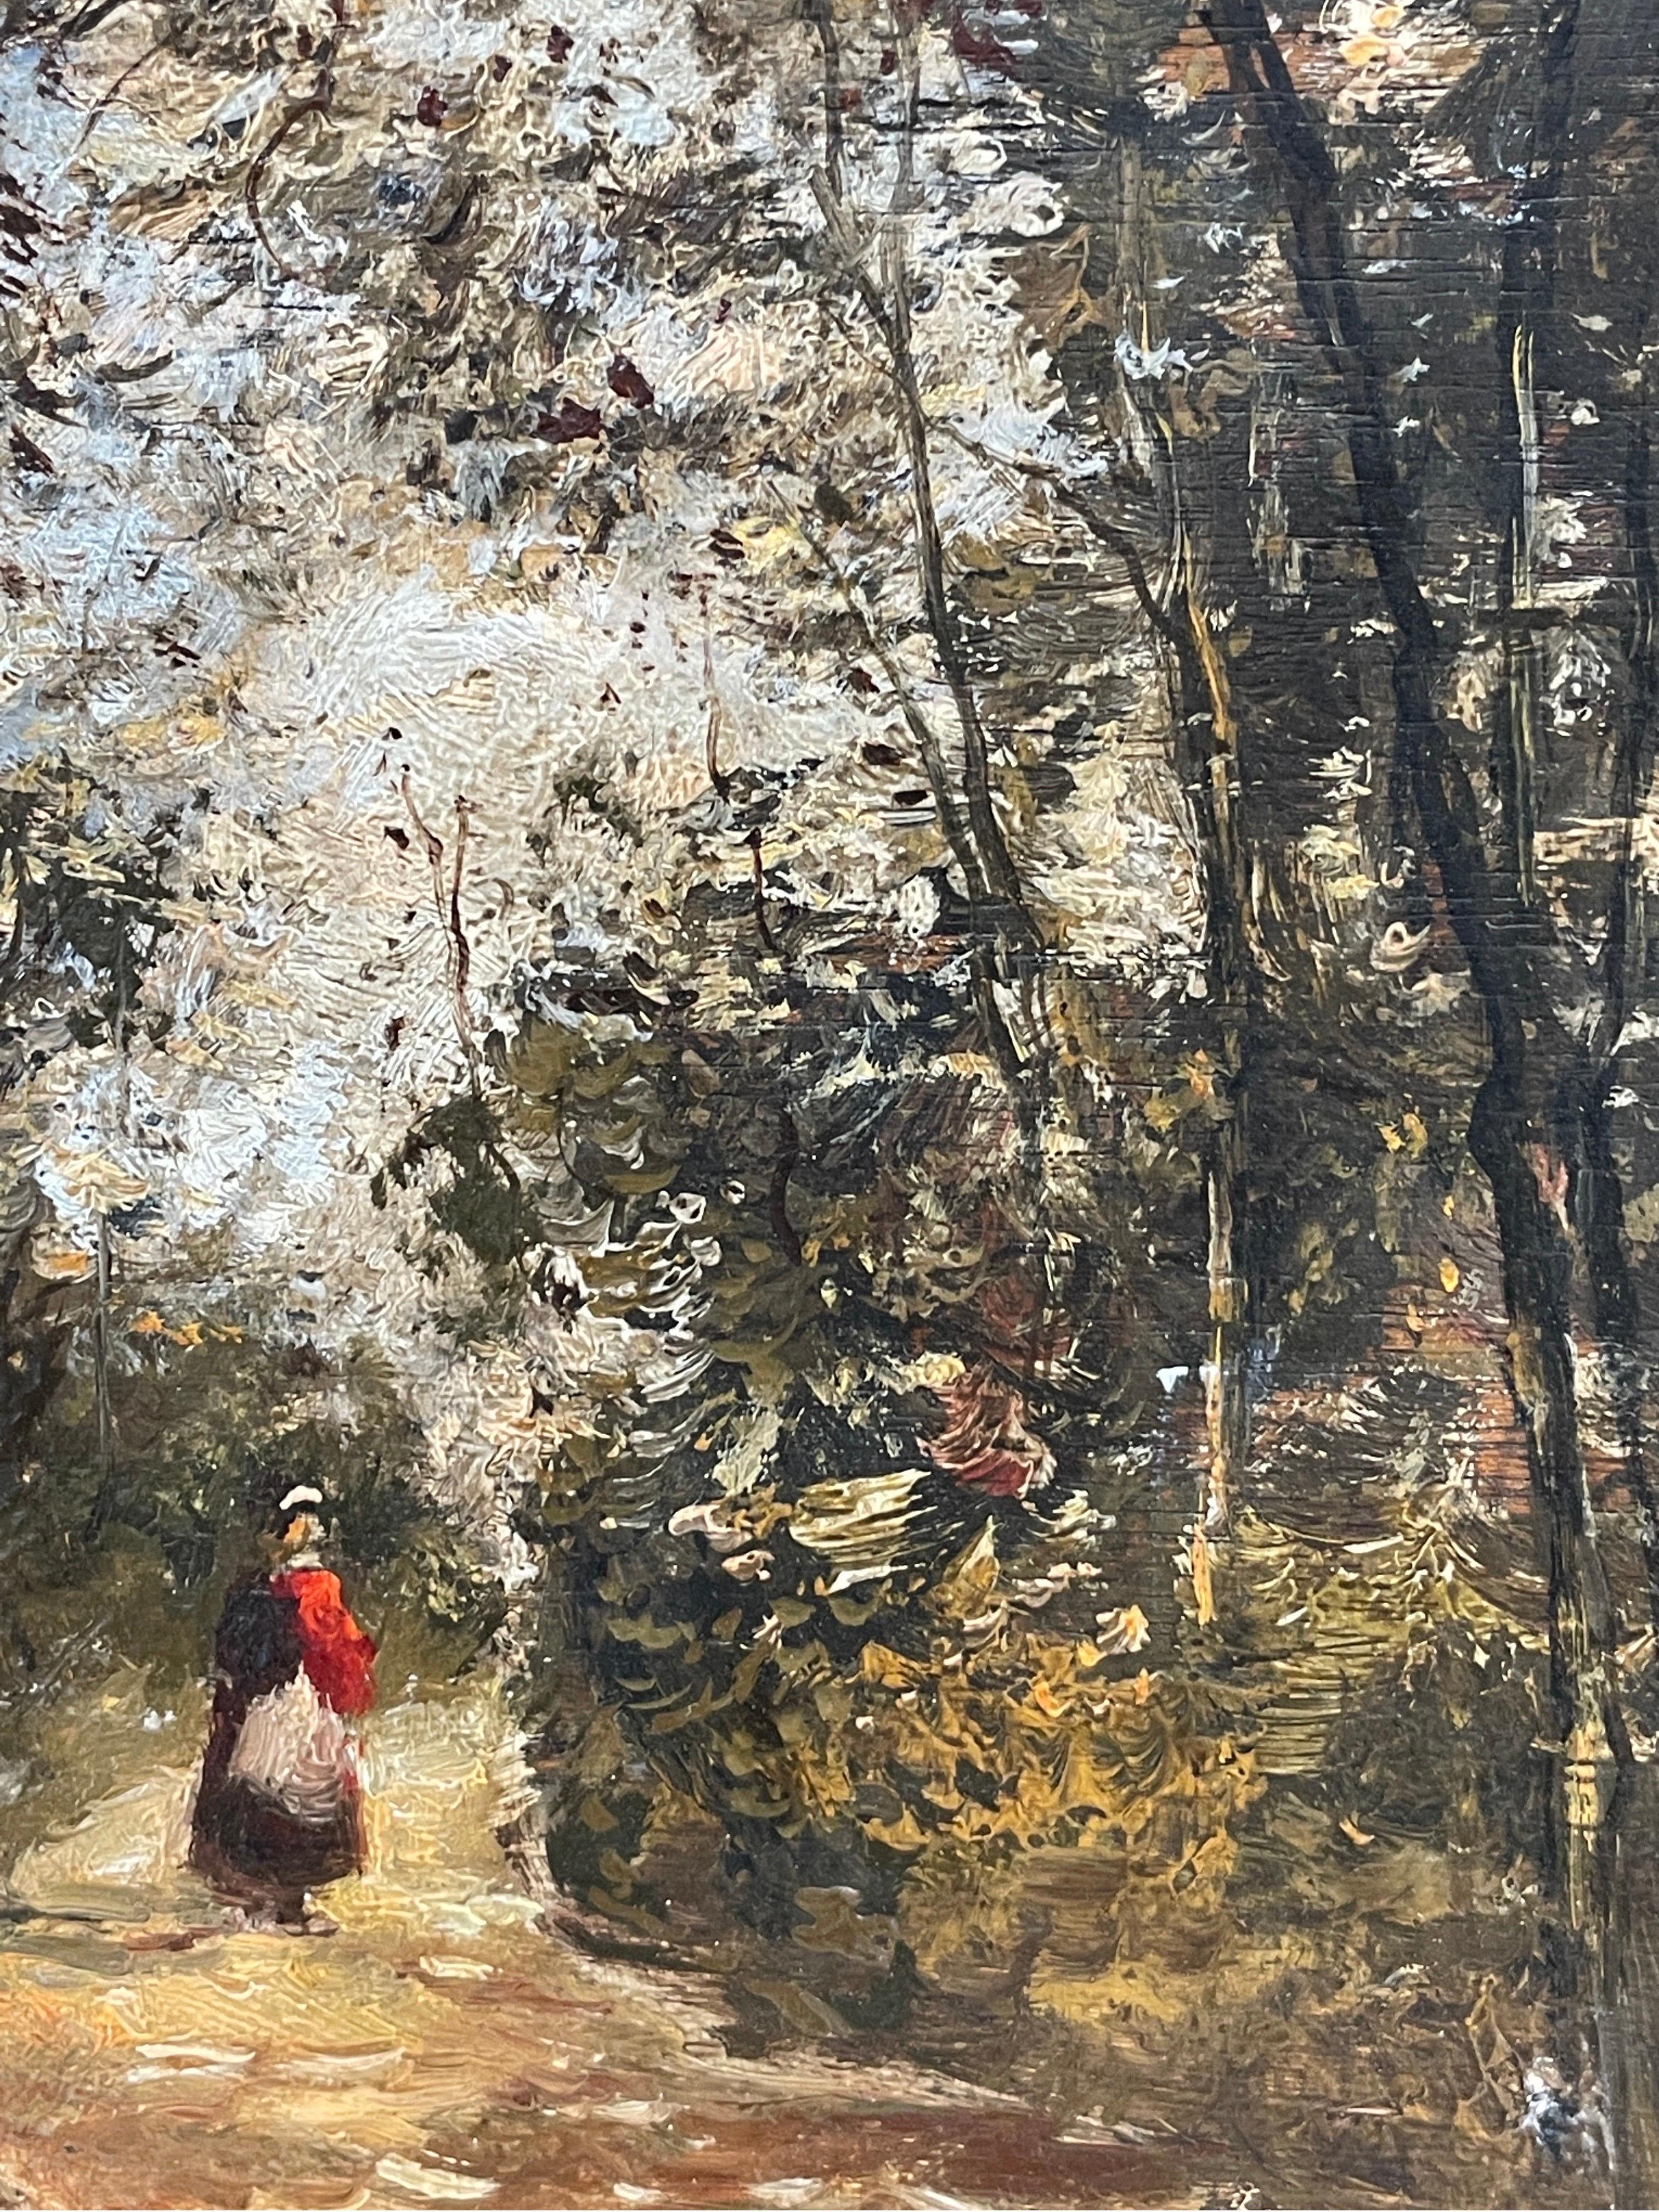 The Woodland Path
by Paul Flaubert (French 1928-1994), signed lower corner
oil painting on board, framed: 16 x 13.5 inches
condition: the painting is in excellent condition; the frame has a few small knocks, etc. from age. Please note, we do not